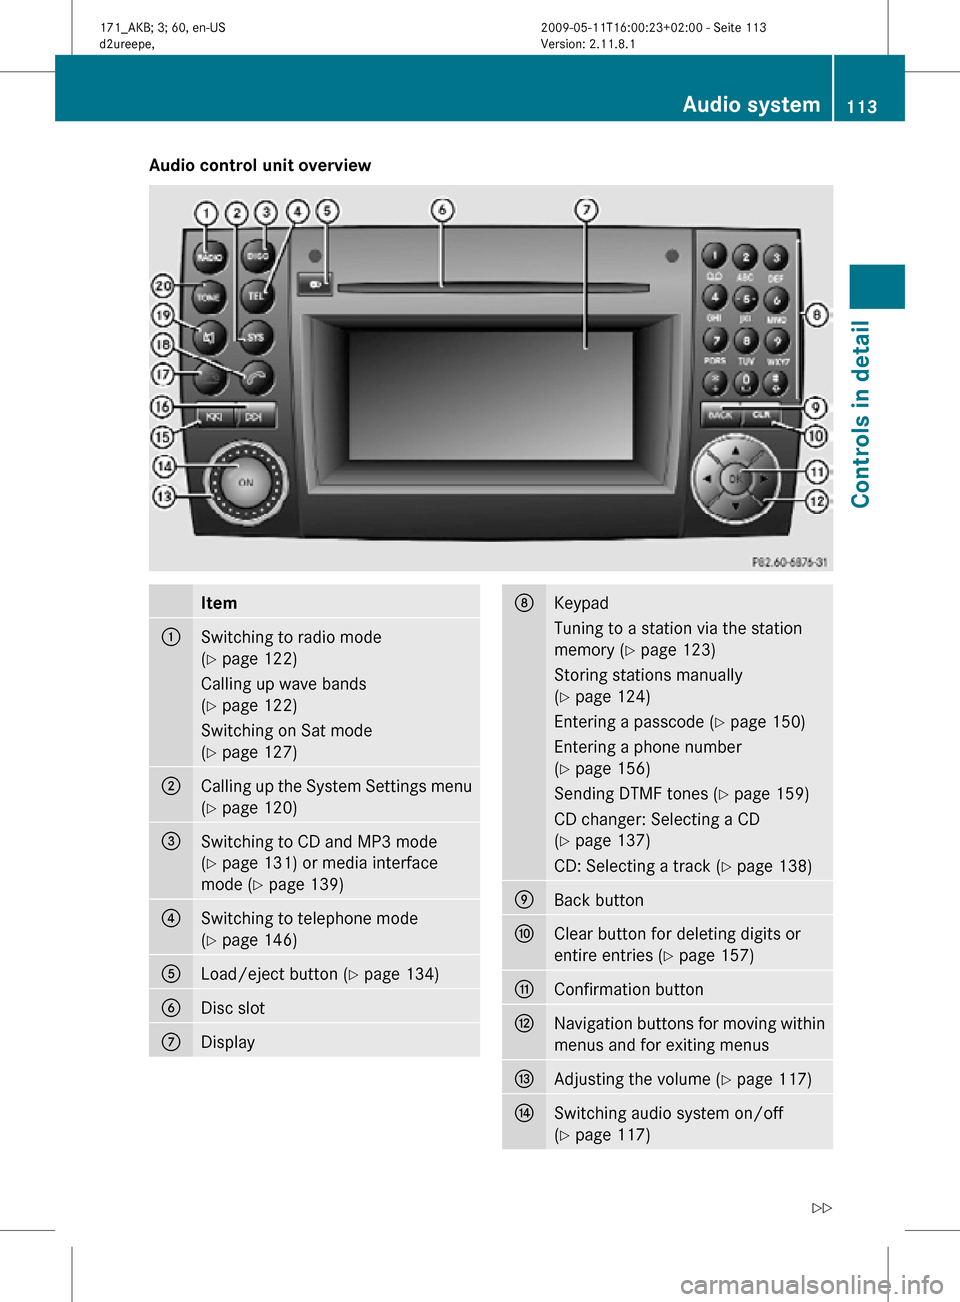 MERCEDES-BENZ SLK300 2011 R170 Owners Manual Audio control unit overview
Item
:
Switching to radio mode
(Y page 122)
Calling up wave bands
(Y page 122)
Switching on Sat mode
(Y page 127)
;
Calling up the System Settings menu
(Y page 120)
=
Switc